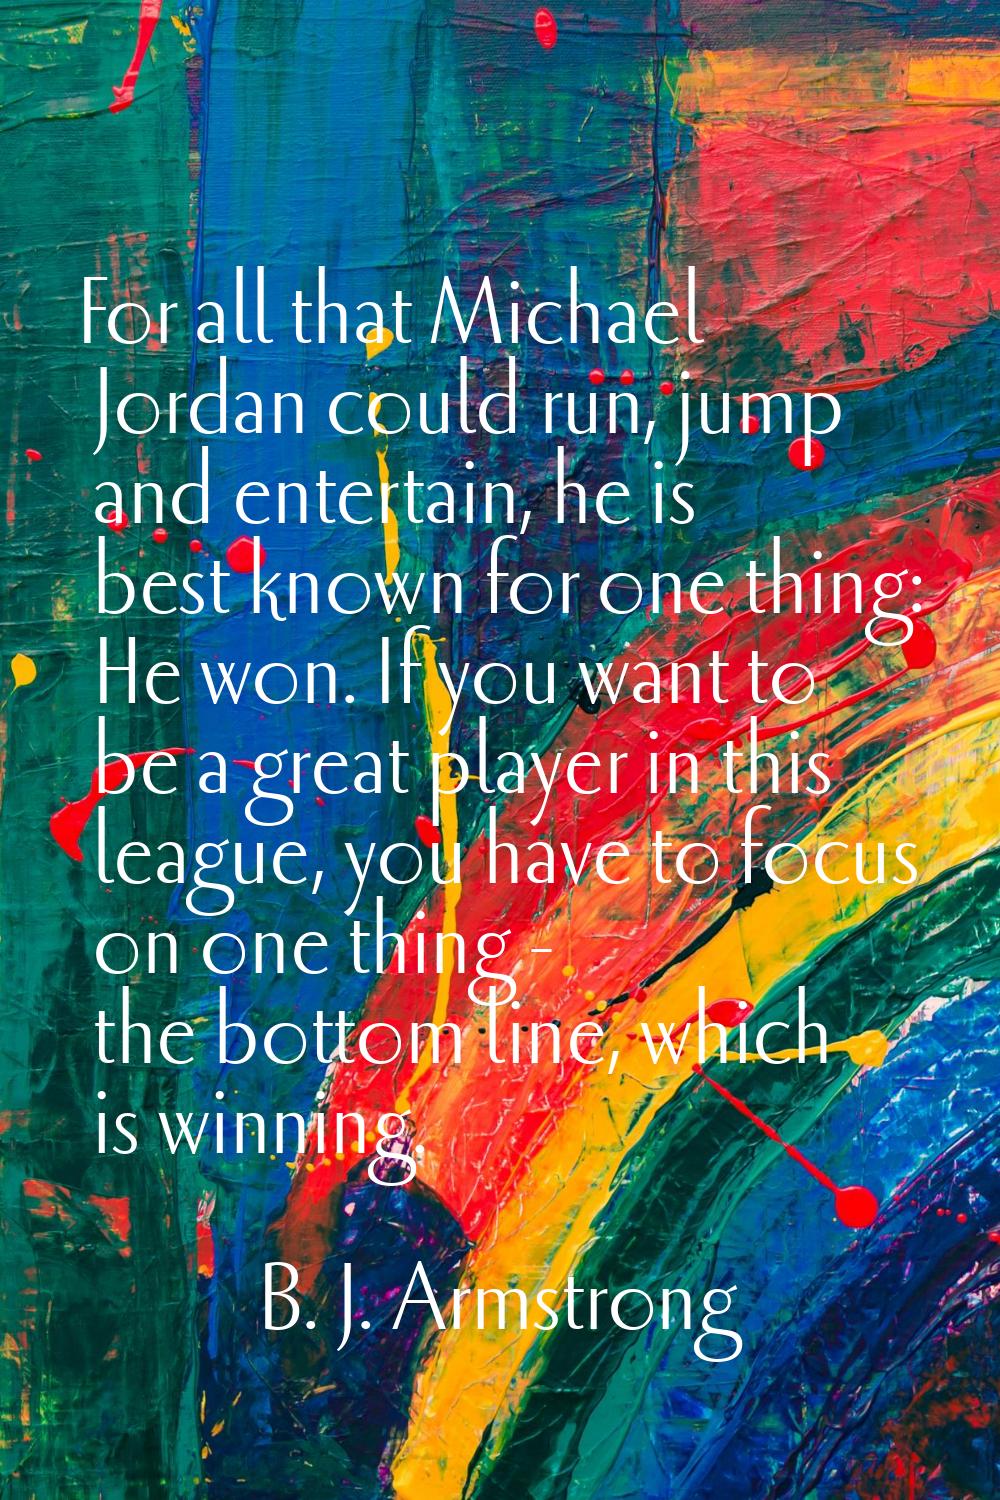 For all that Michael Jordan could run, jump and entertain, he is best known for one thing: He won. 